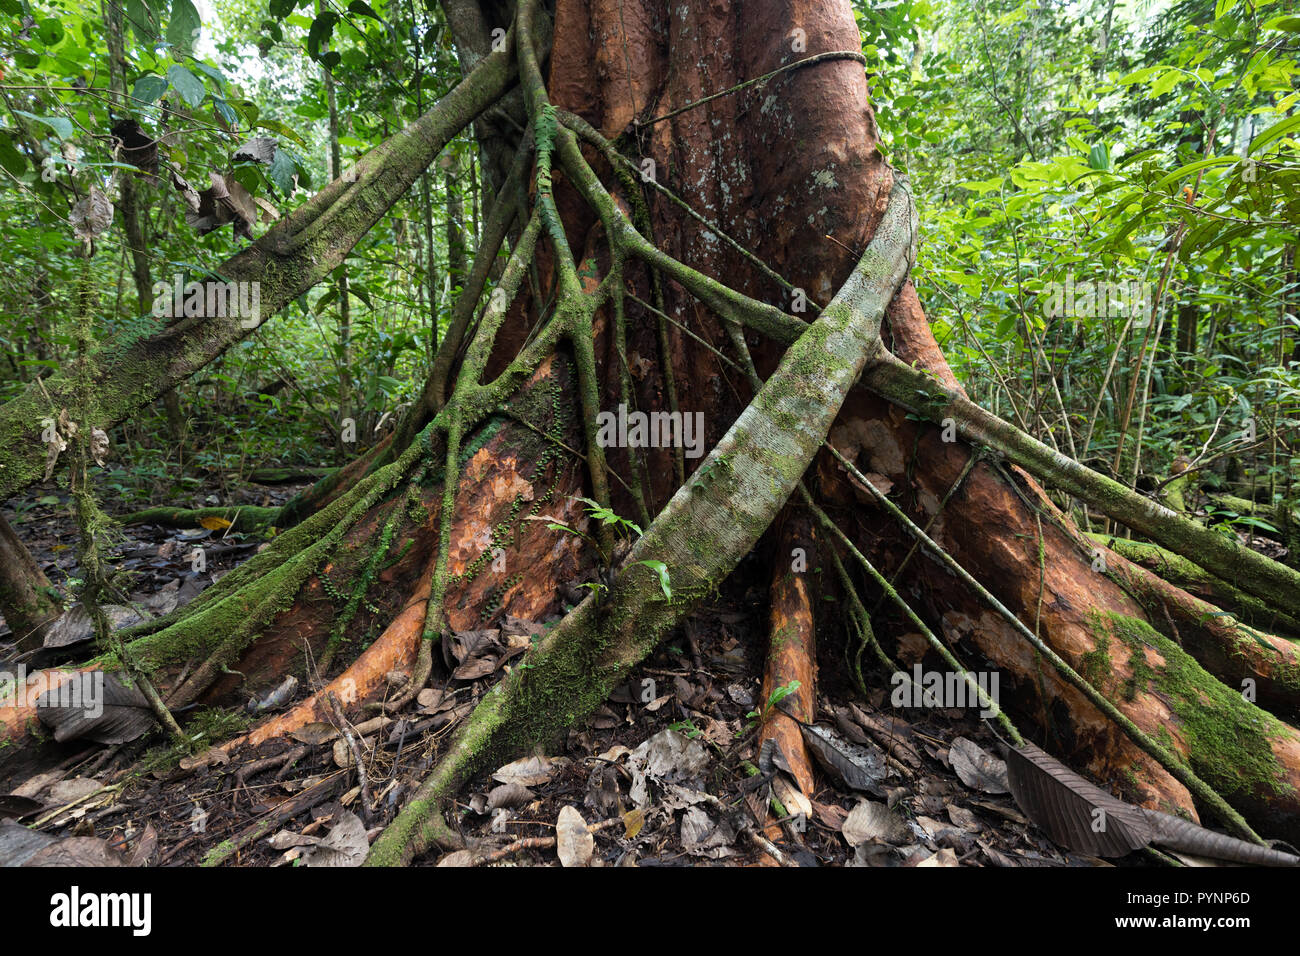 Fig tree strangling another tree in Aru island jungle, Papua, Indonesia Stock Photo